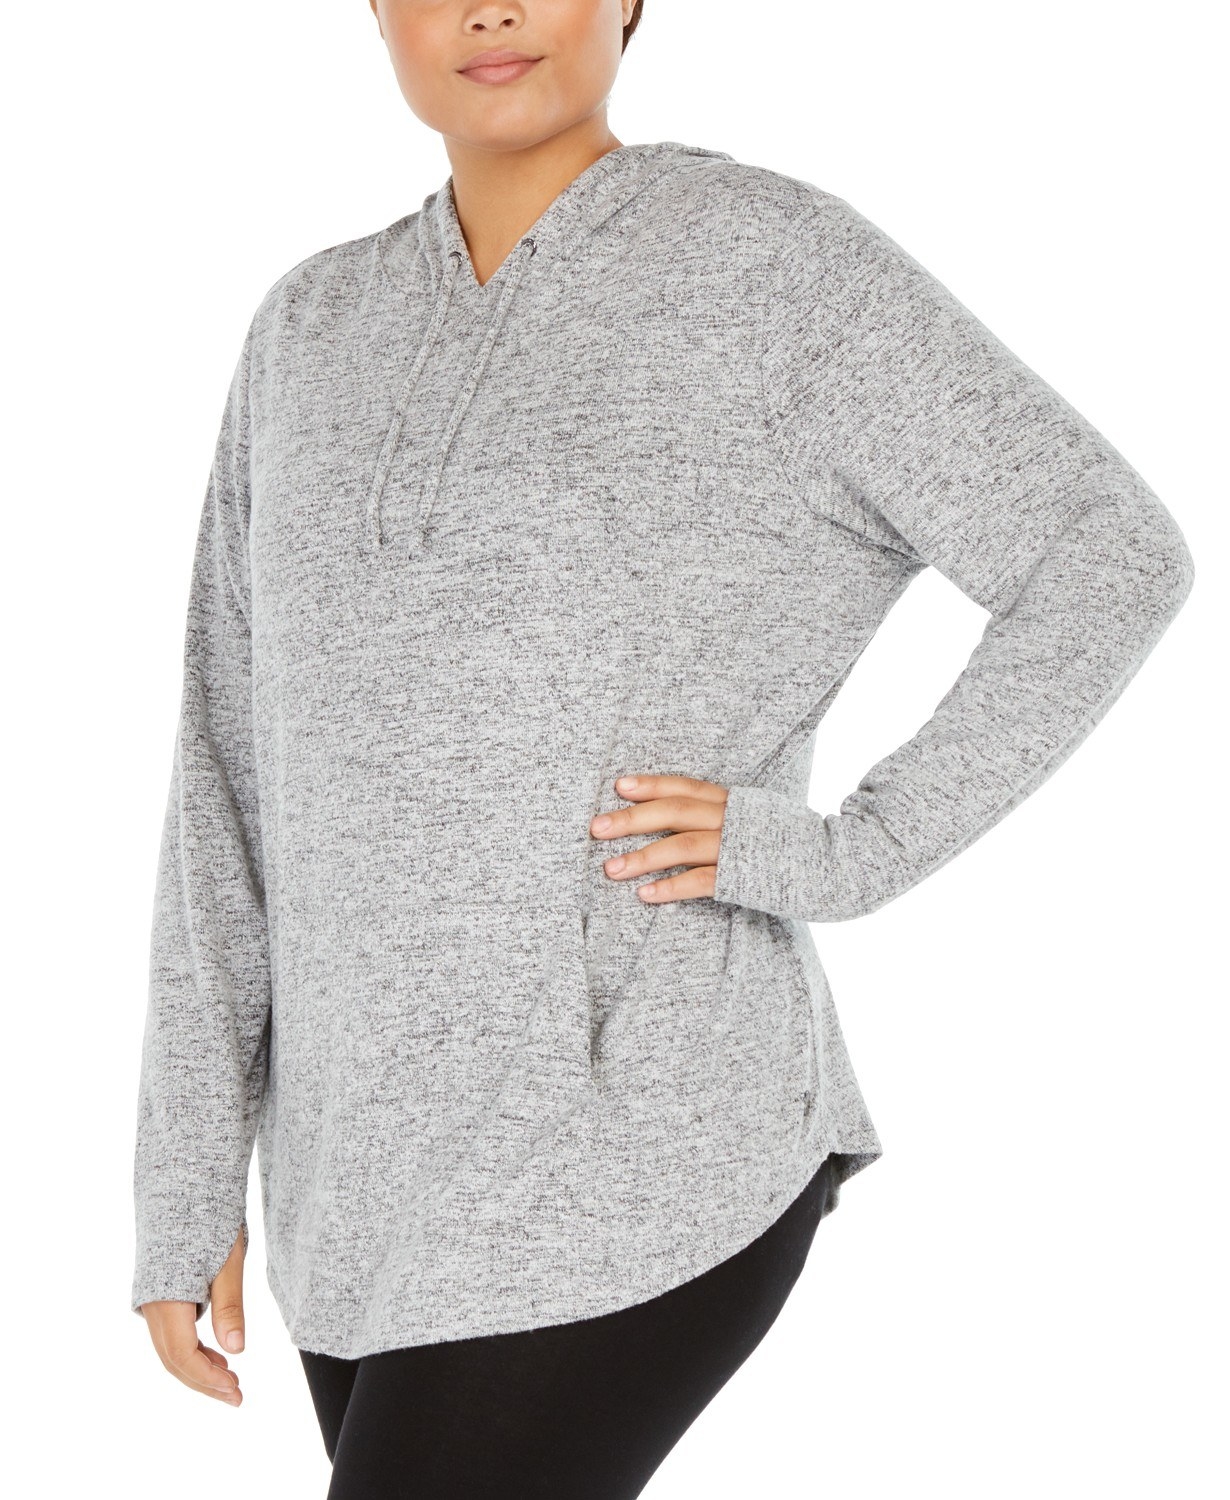 Model in gray thumb-hole hoodie with drawstrings at collar 